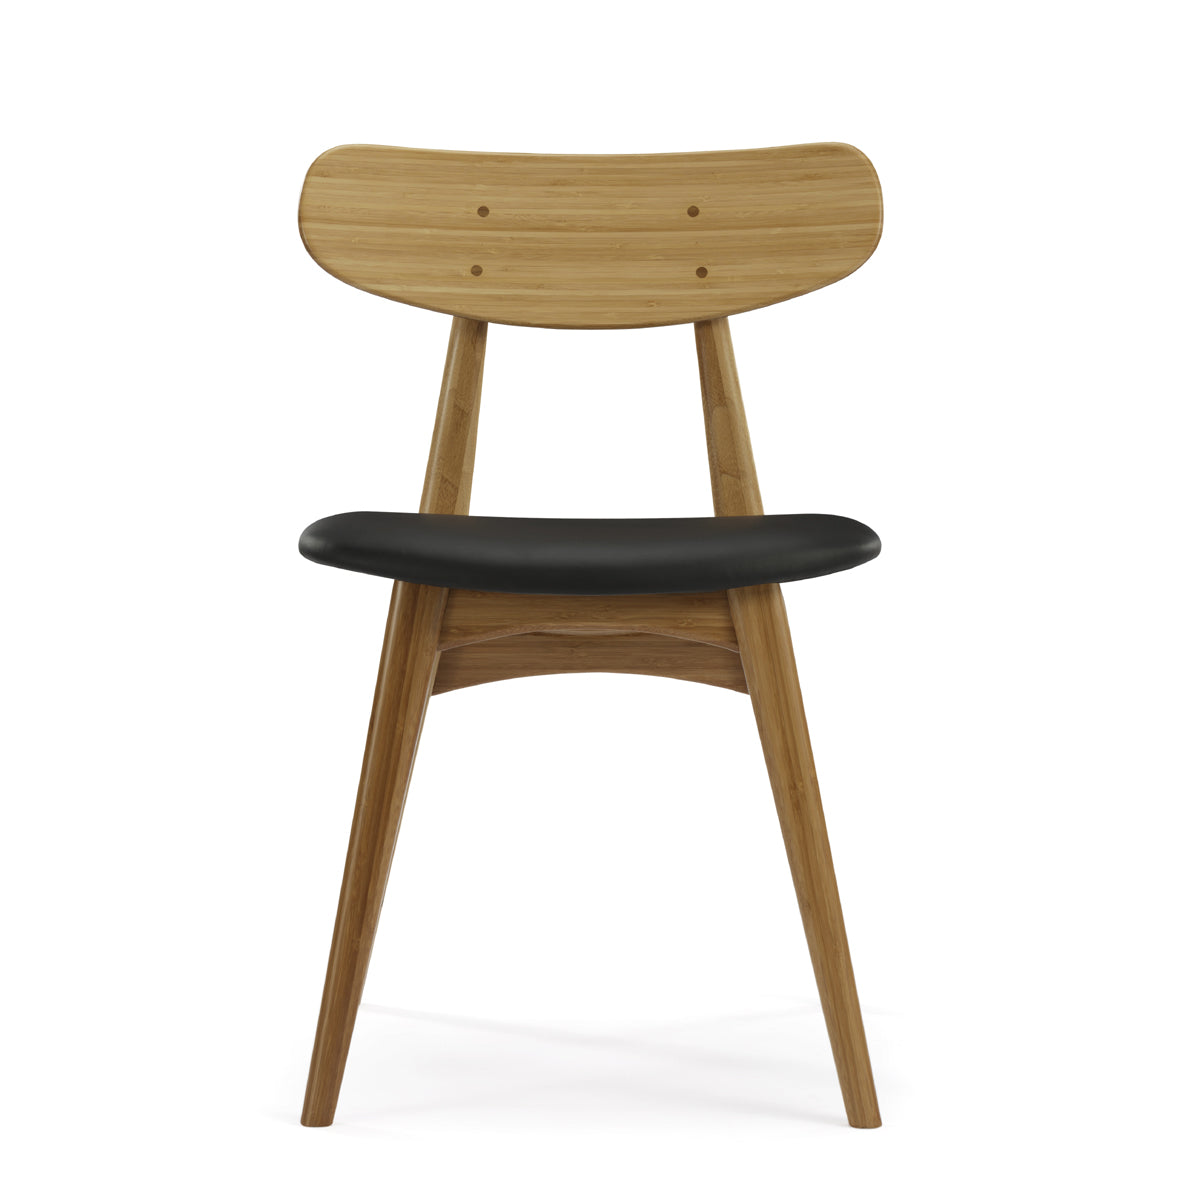 Load image into Gallery viewer, Cassia Dining Chair With Leather Seat Caramelized (Set of 2) Stools &amp;amp; Chairs Greenington     Four Hands, Burke Decor, Mid Century Modern Furniture, Old Bones Furniture Company, Old Bones Co, Modern Mid Century, Designer Furniture, https://www.oldbonesco.com/
